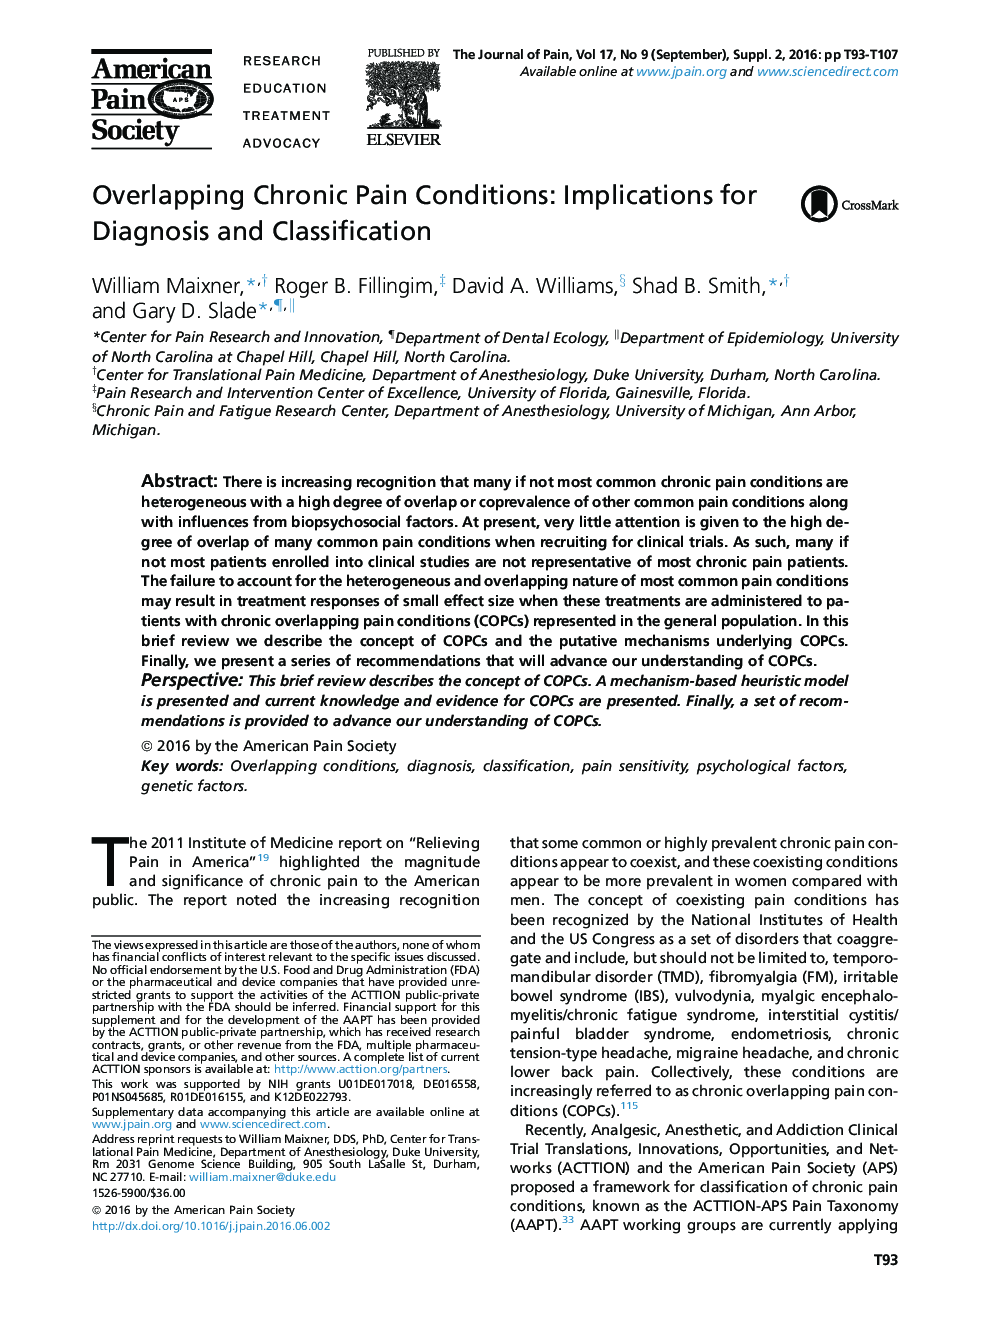 Overlapping Chronic Pain Conditions: Implications for Diagnosis and Classification 